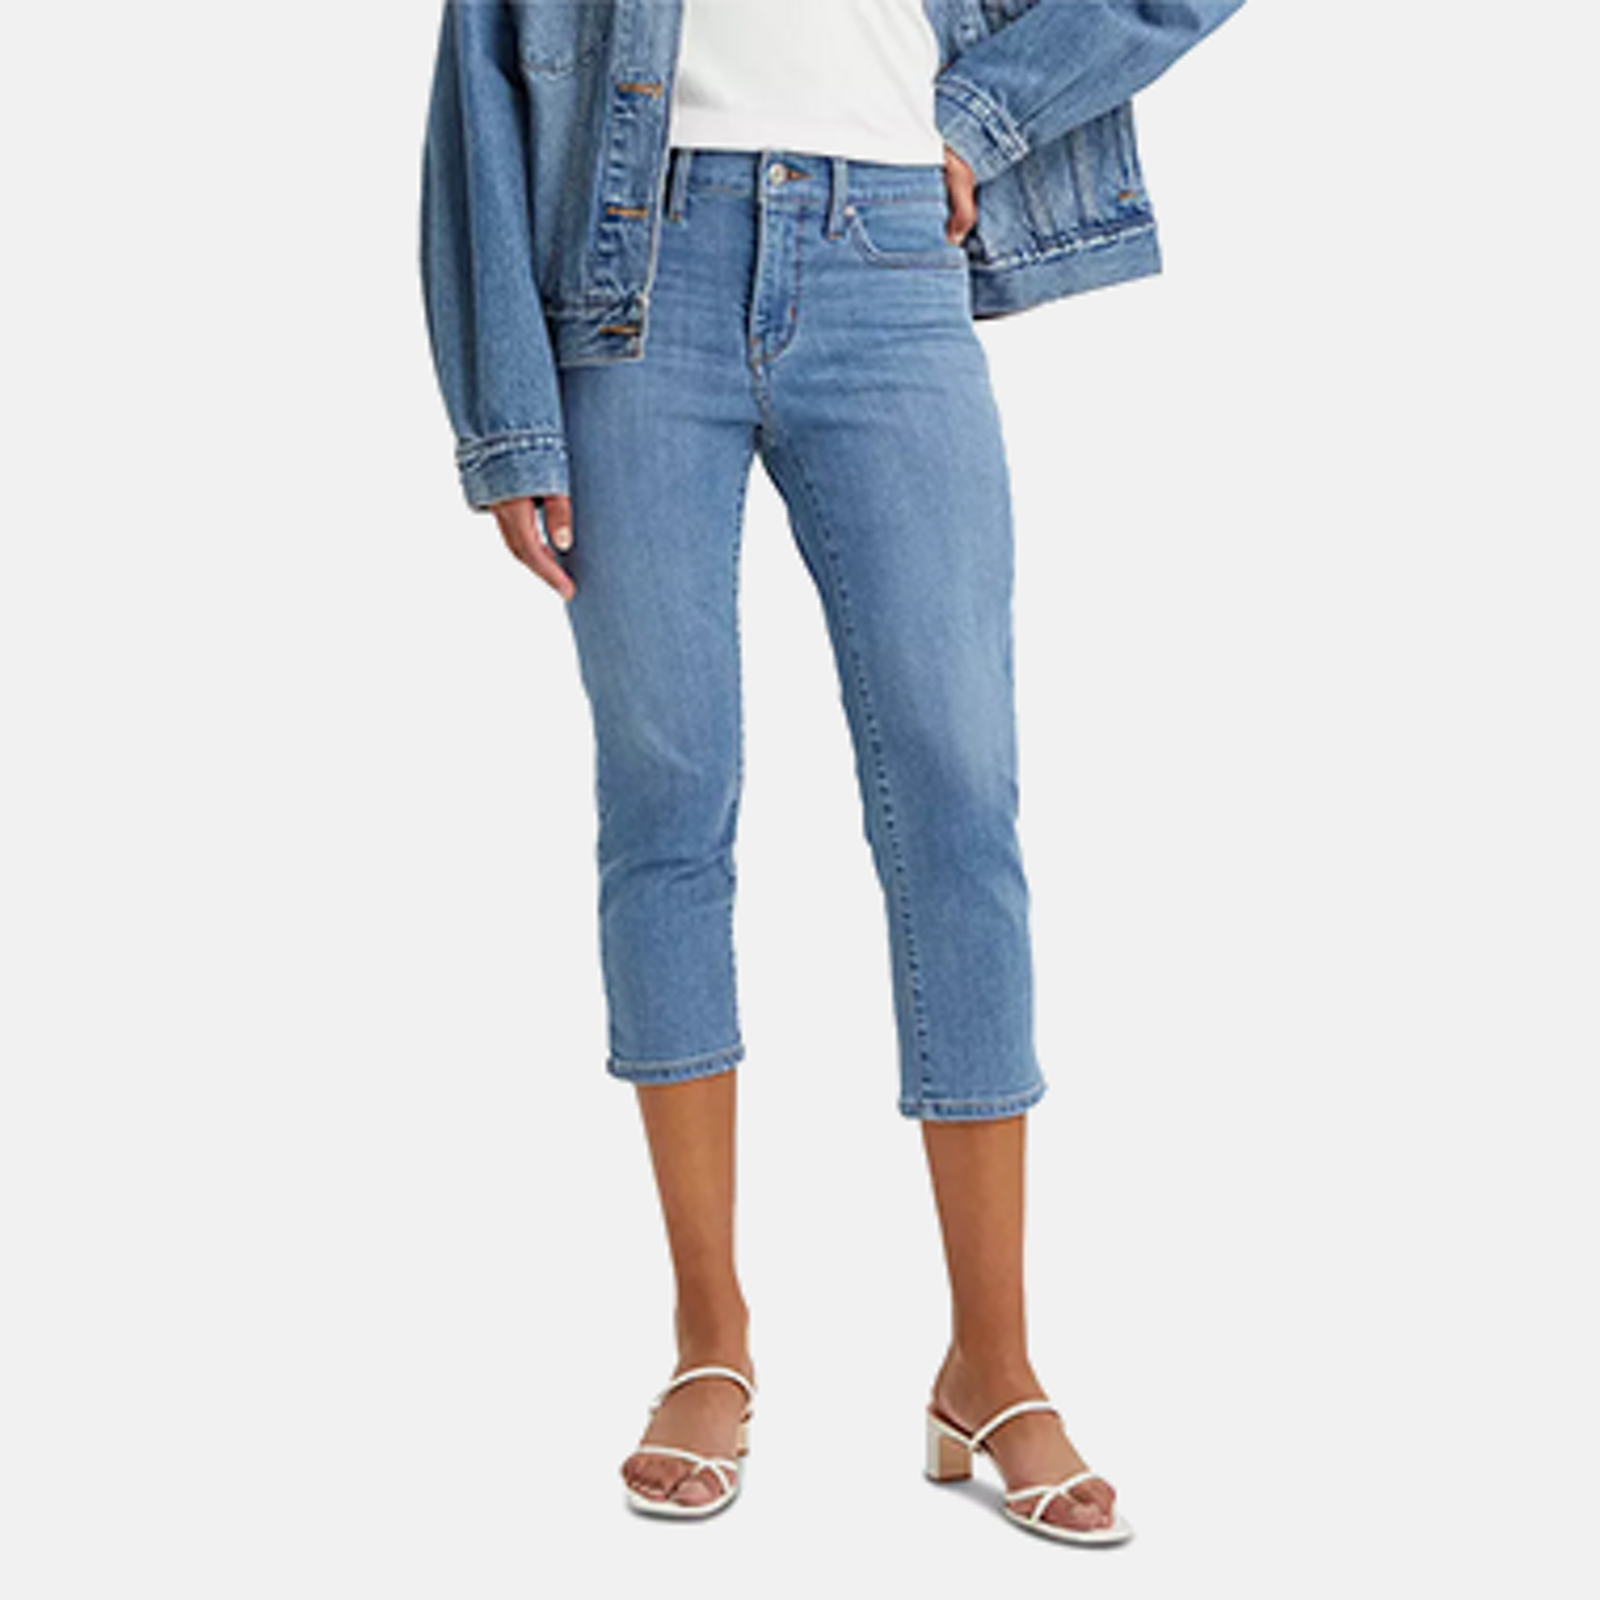 Women's Classic Bootcut Jeans in Short Length